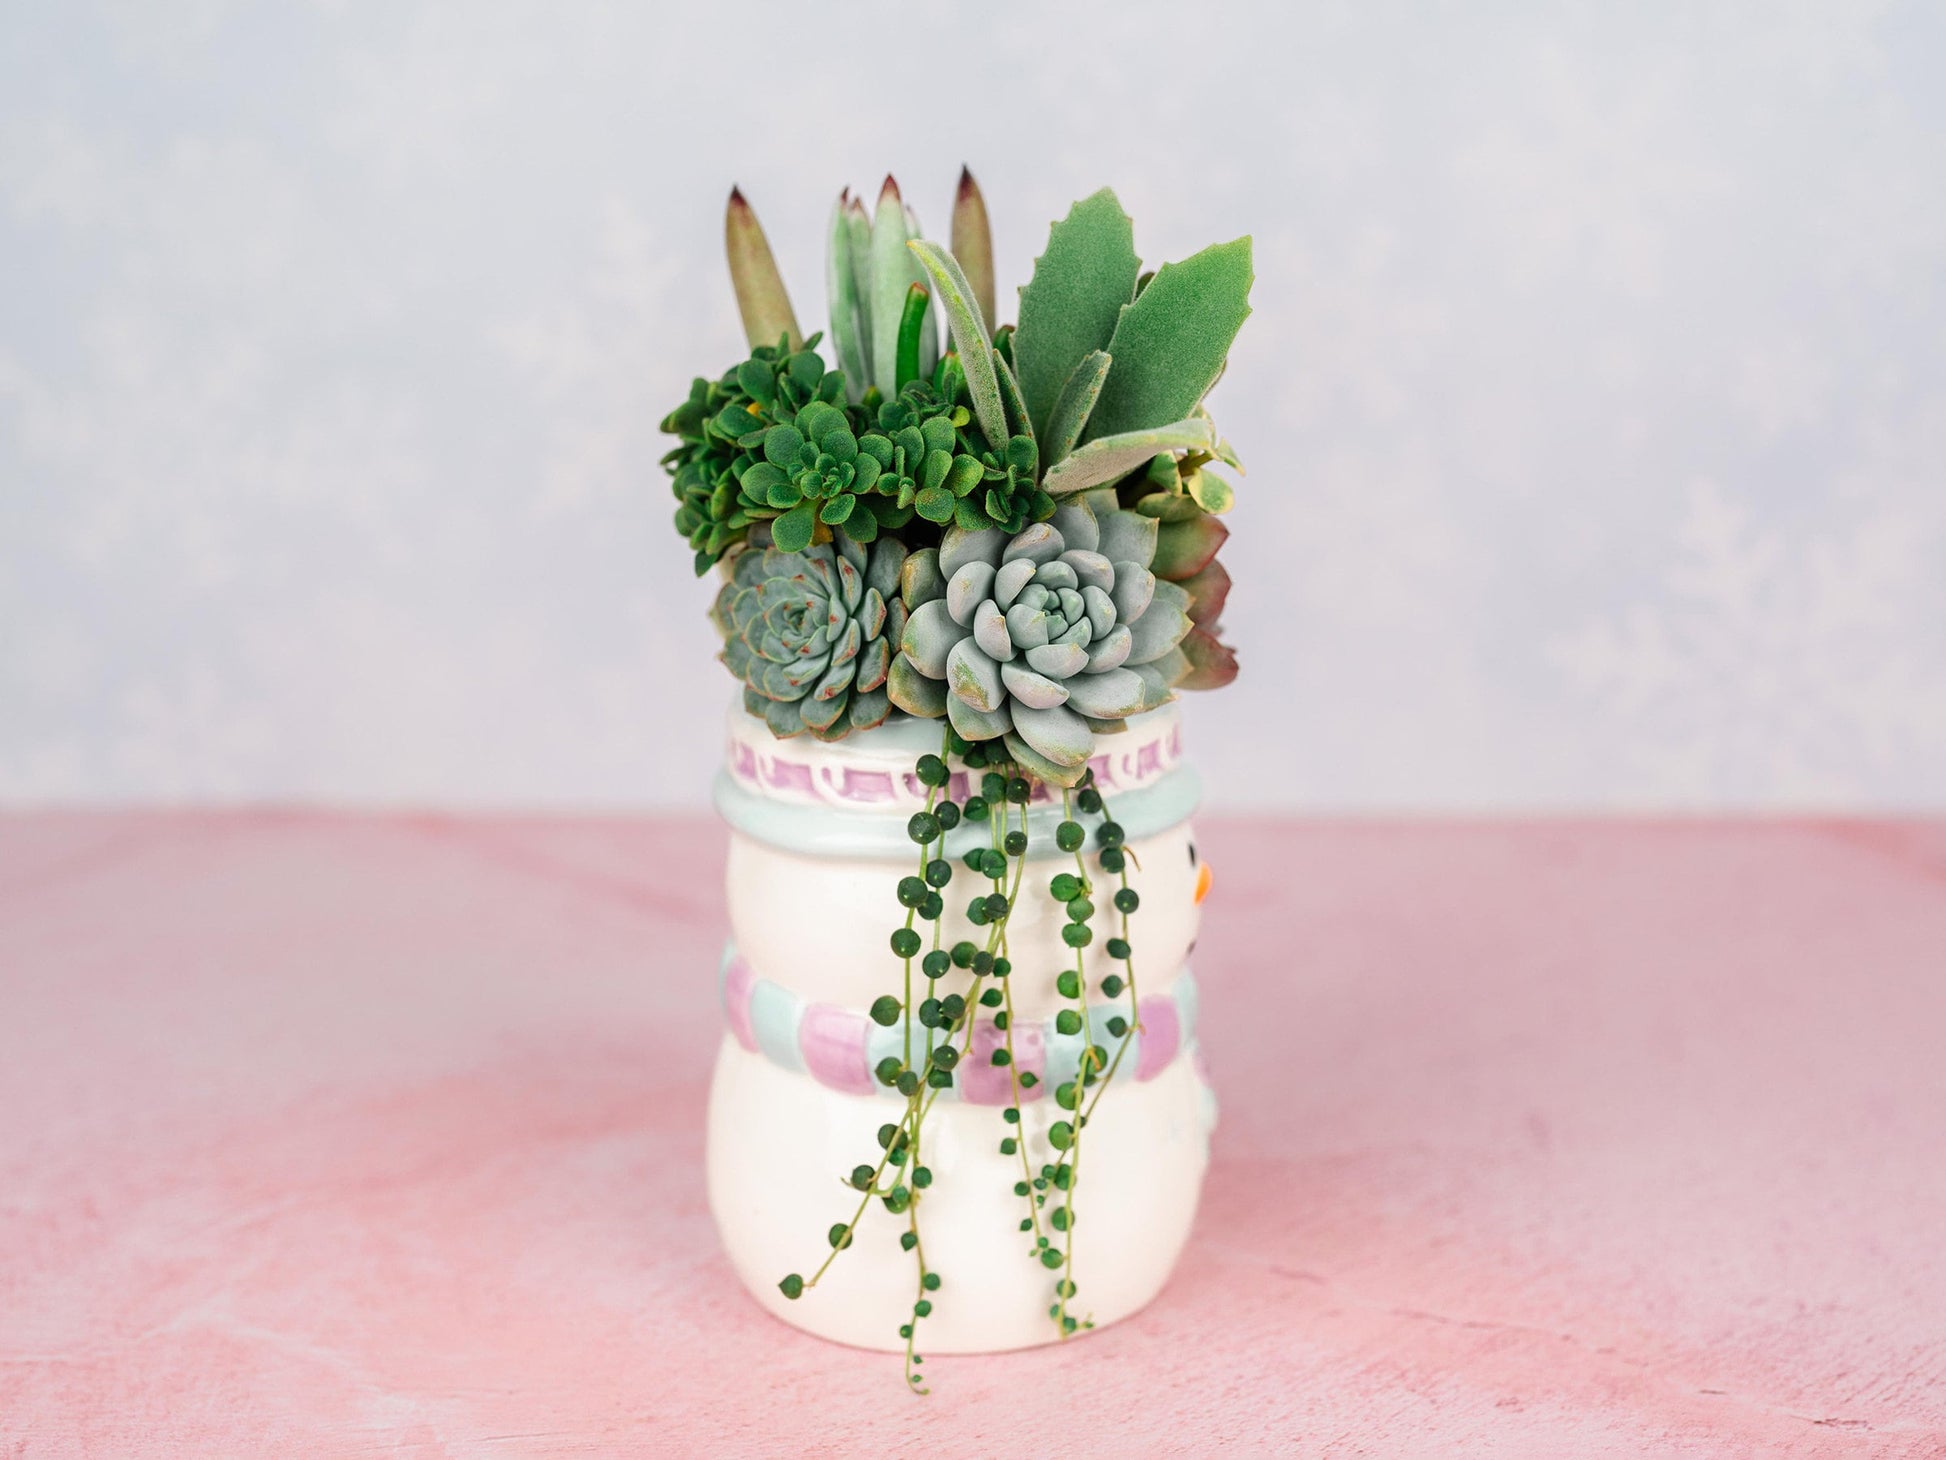 Snowman Mug Succulent Holiday Arrangement Bursting with Living Succulents for Christmas Gifts and Winter Home Decor